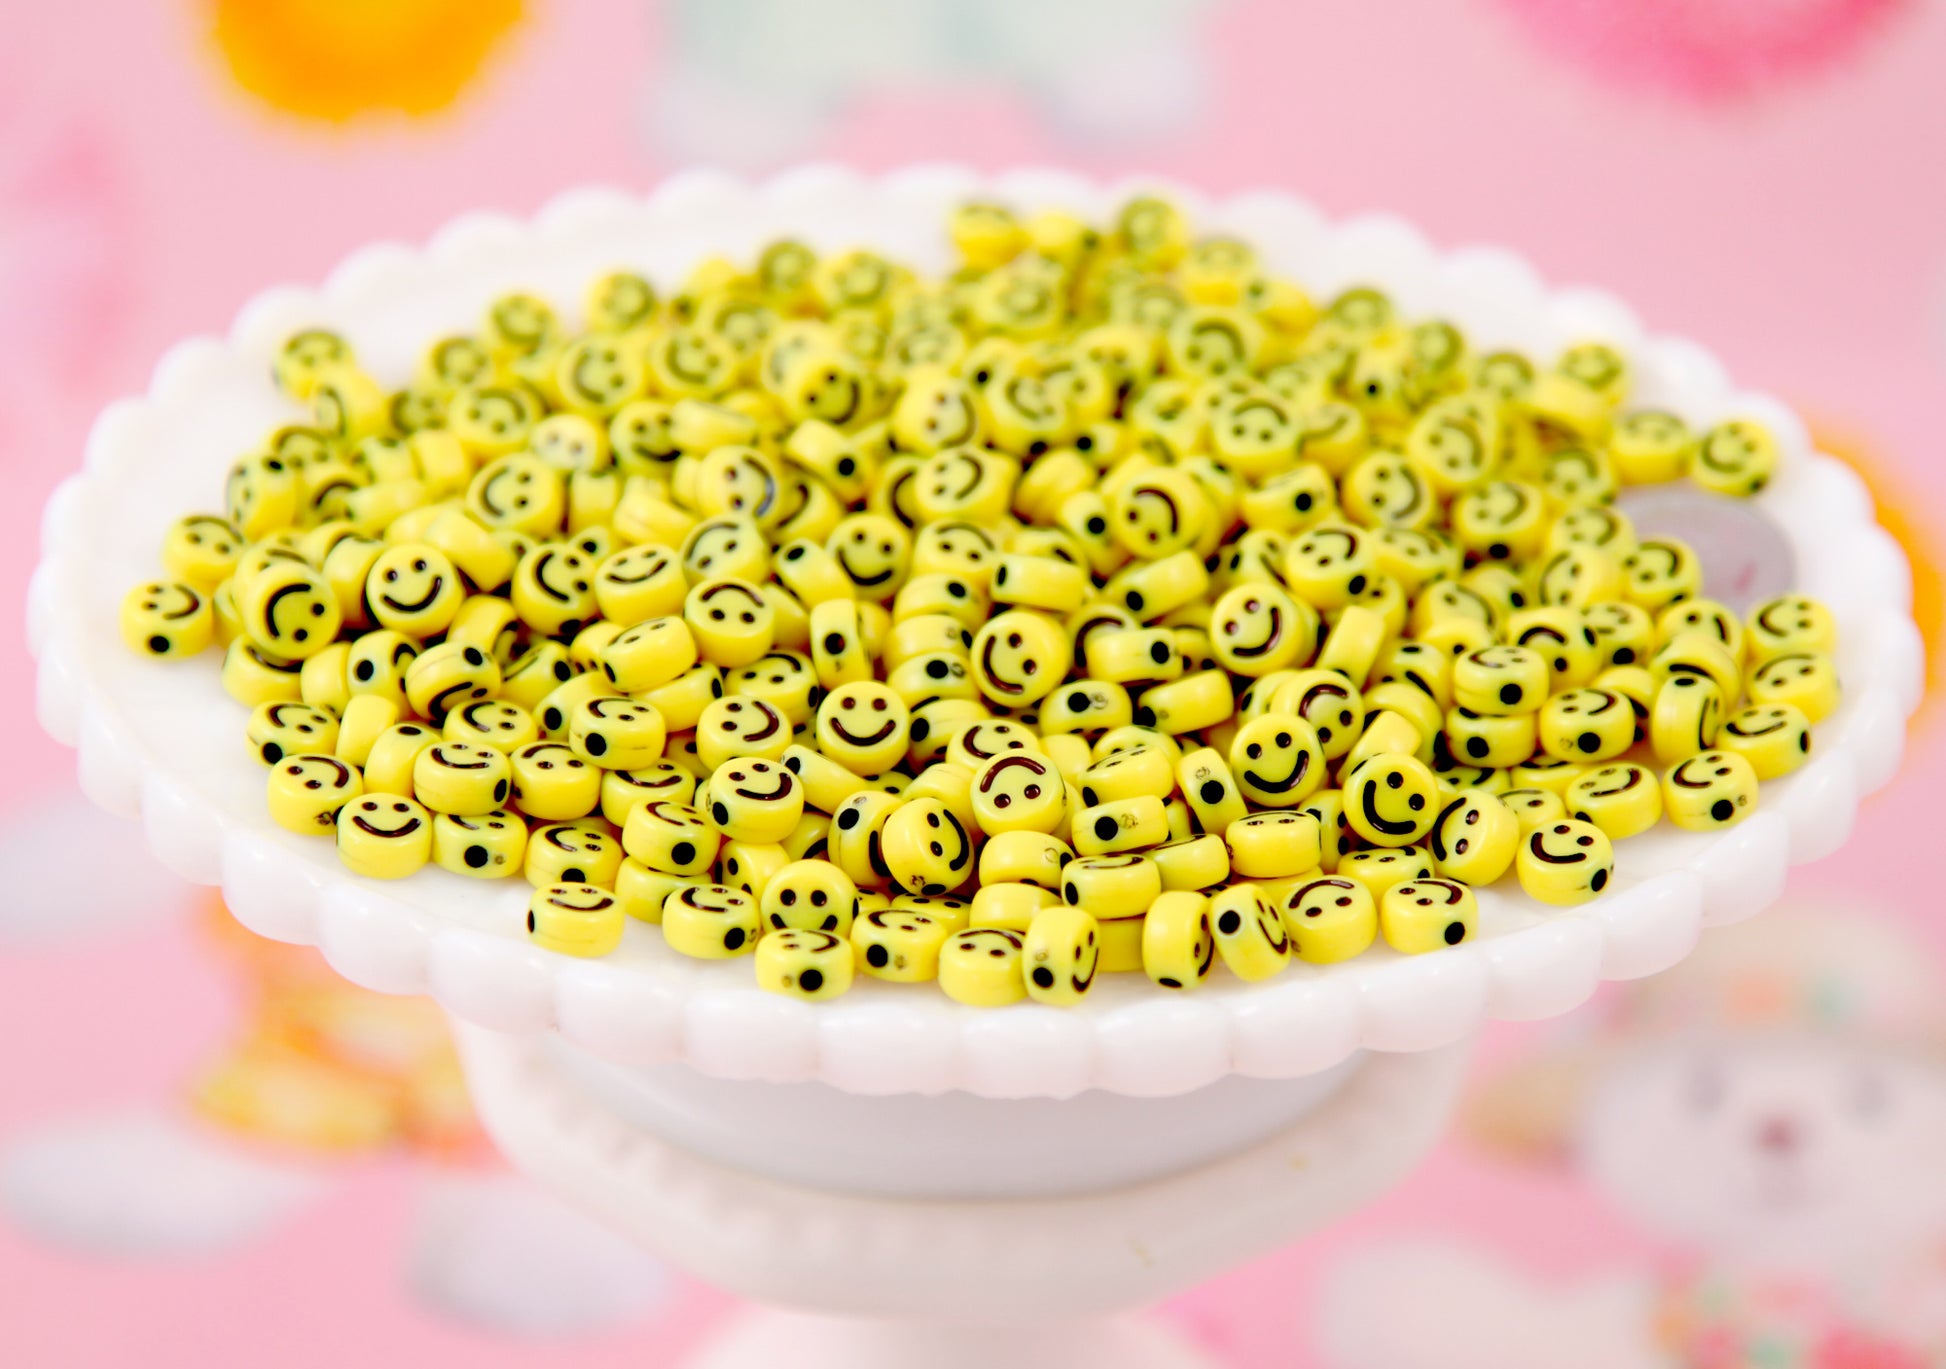 Smiley Face beads, Smiley Beads, Round Flat Beads, 10/12 mm, Random holes  30 Pcs